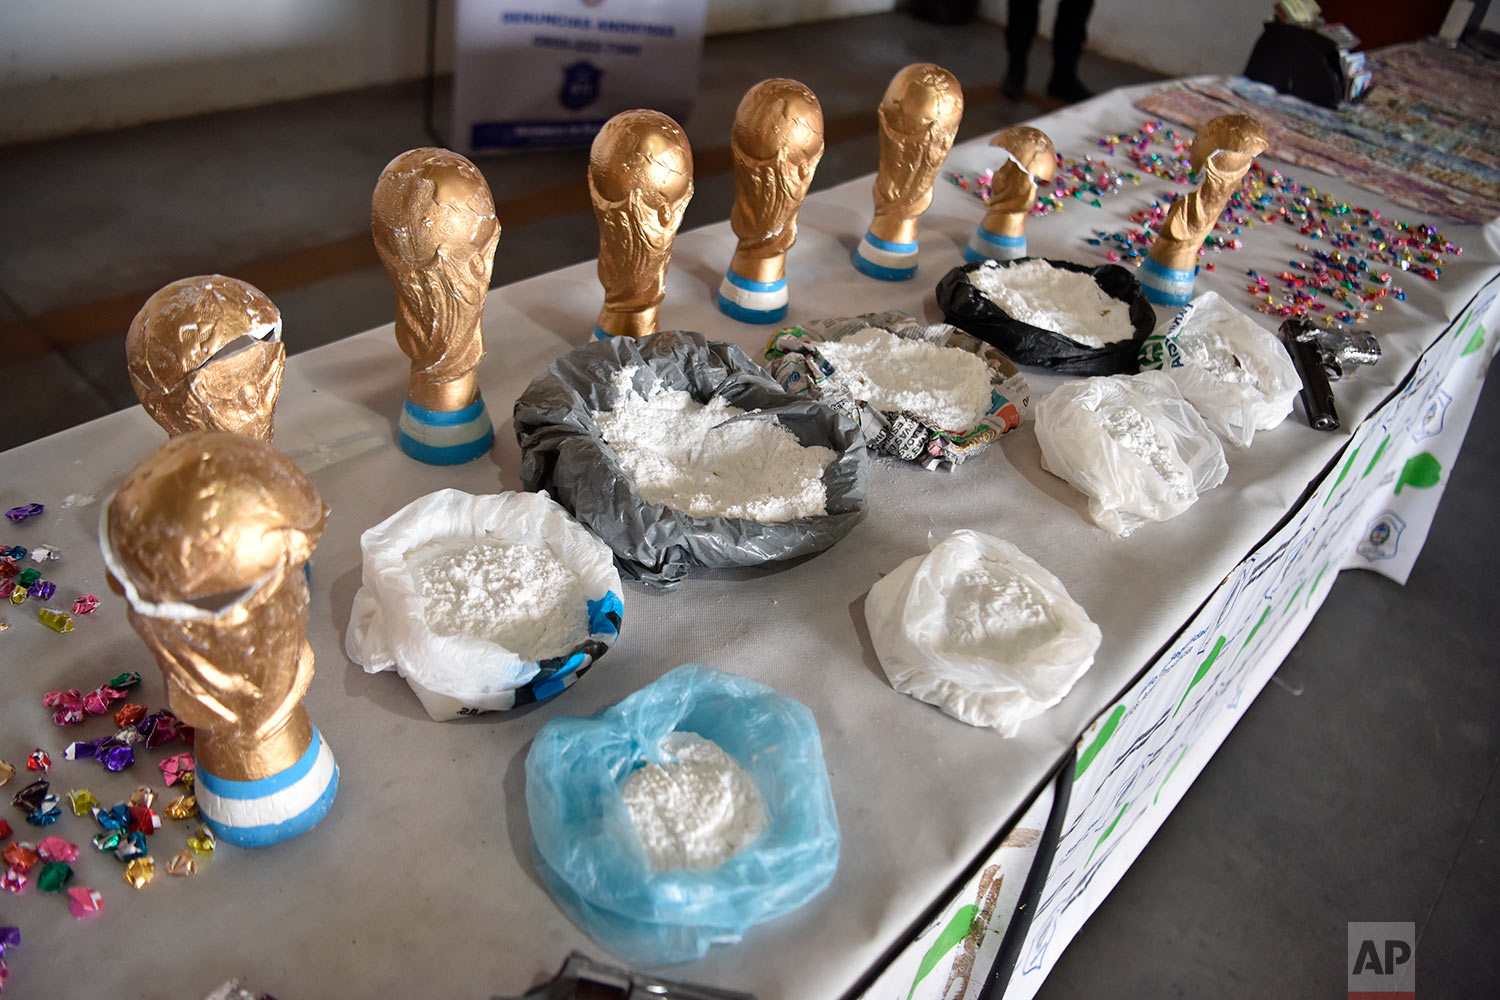  This photo released by the National Security Ministry shows fake World Cup trophies stuffed with cocaine, and the product itself on display next to the trophies, in Buenos Aires, Argentina, June 21, 2018 photo. (National Security Ministry via AP) 